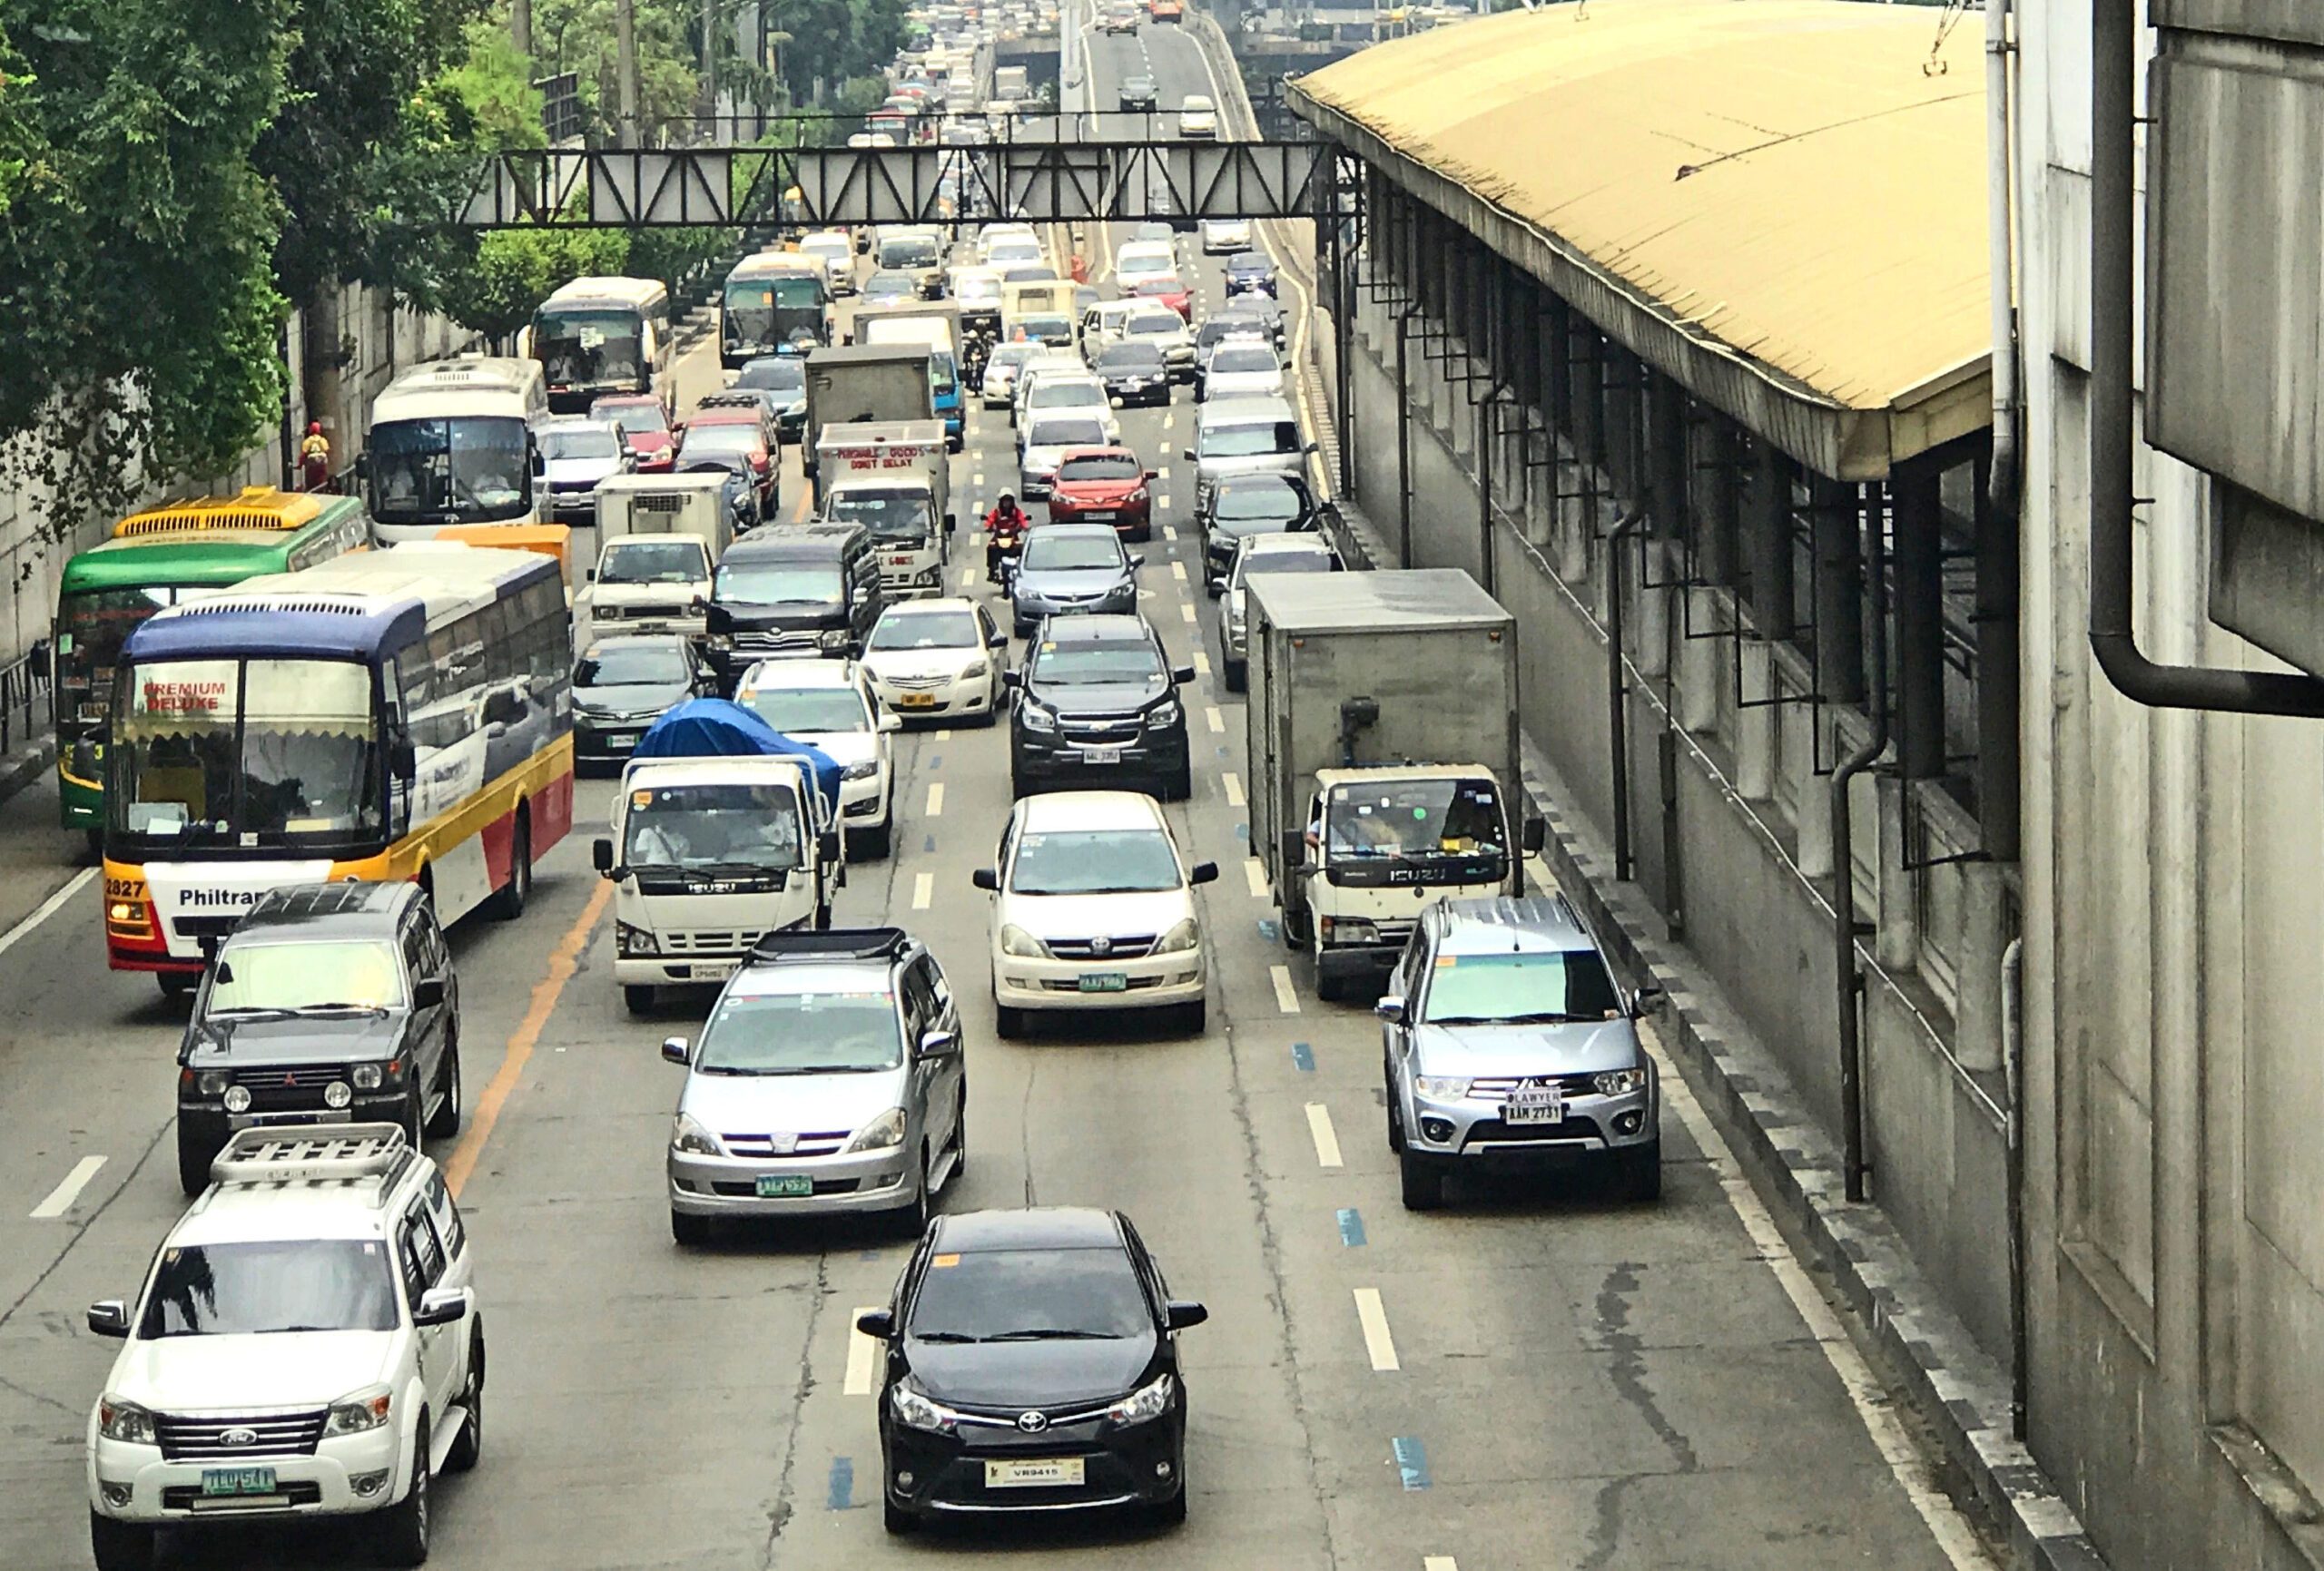 Metro Manila mayors eye higher fines for buses, illegal parking